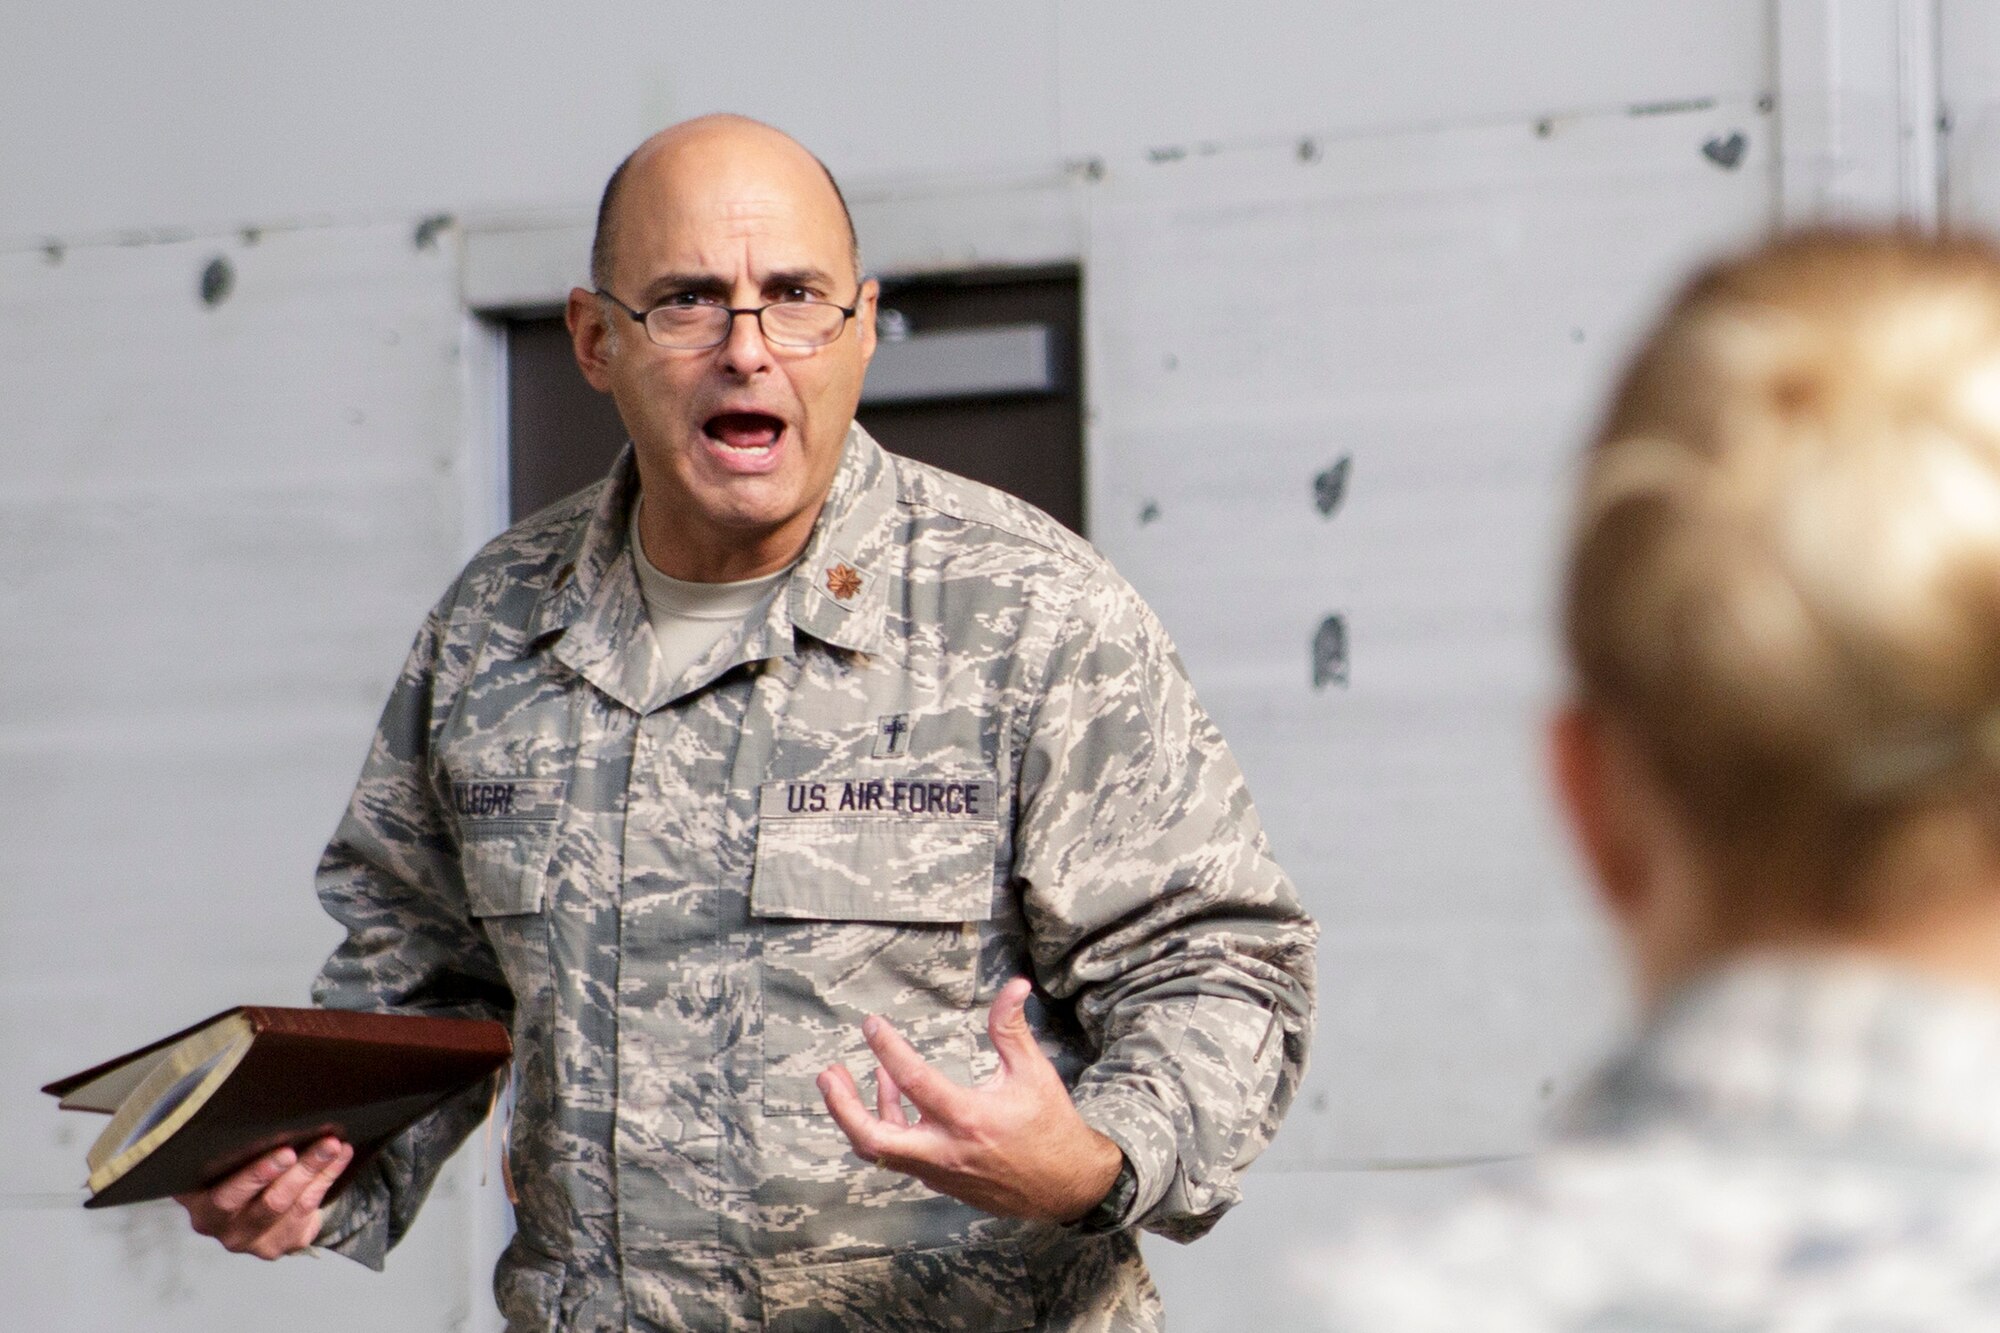 Chaplain (Maj.) Pierre Allegre, the 446th Airlift Wing chaplain, gives a sermon during the Reserve weekend, Nov. 3. The chaplain said Veterans’ Day is a reminder of why he wears his Air Force uniform. (U.S. Air Force Reserve photo by Master Sgt. Jake Chappelle)